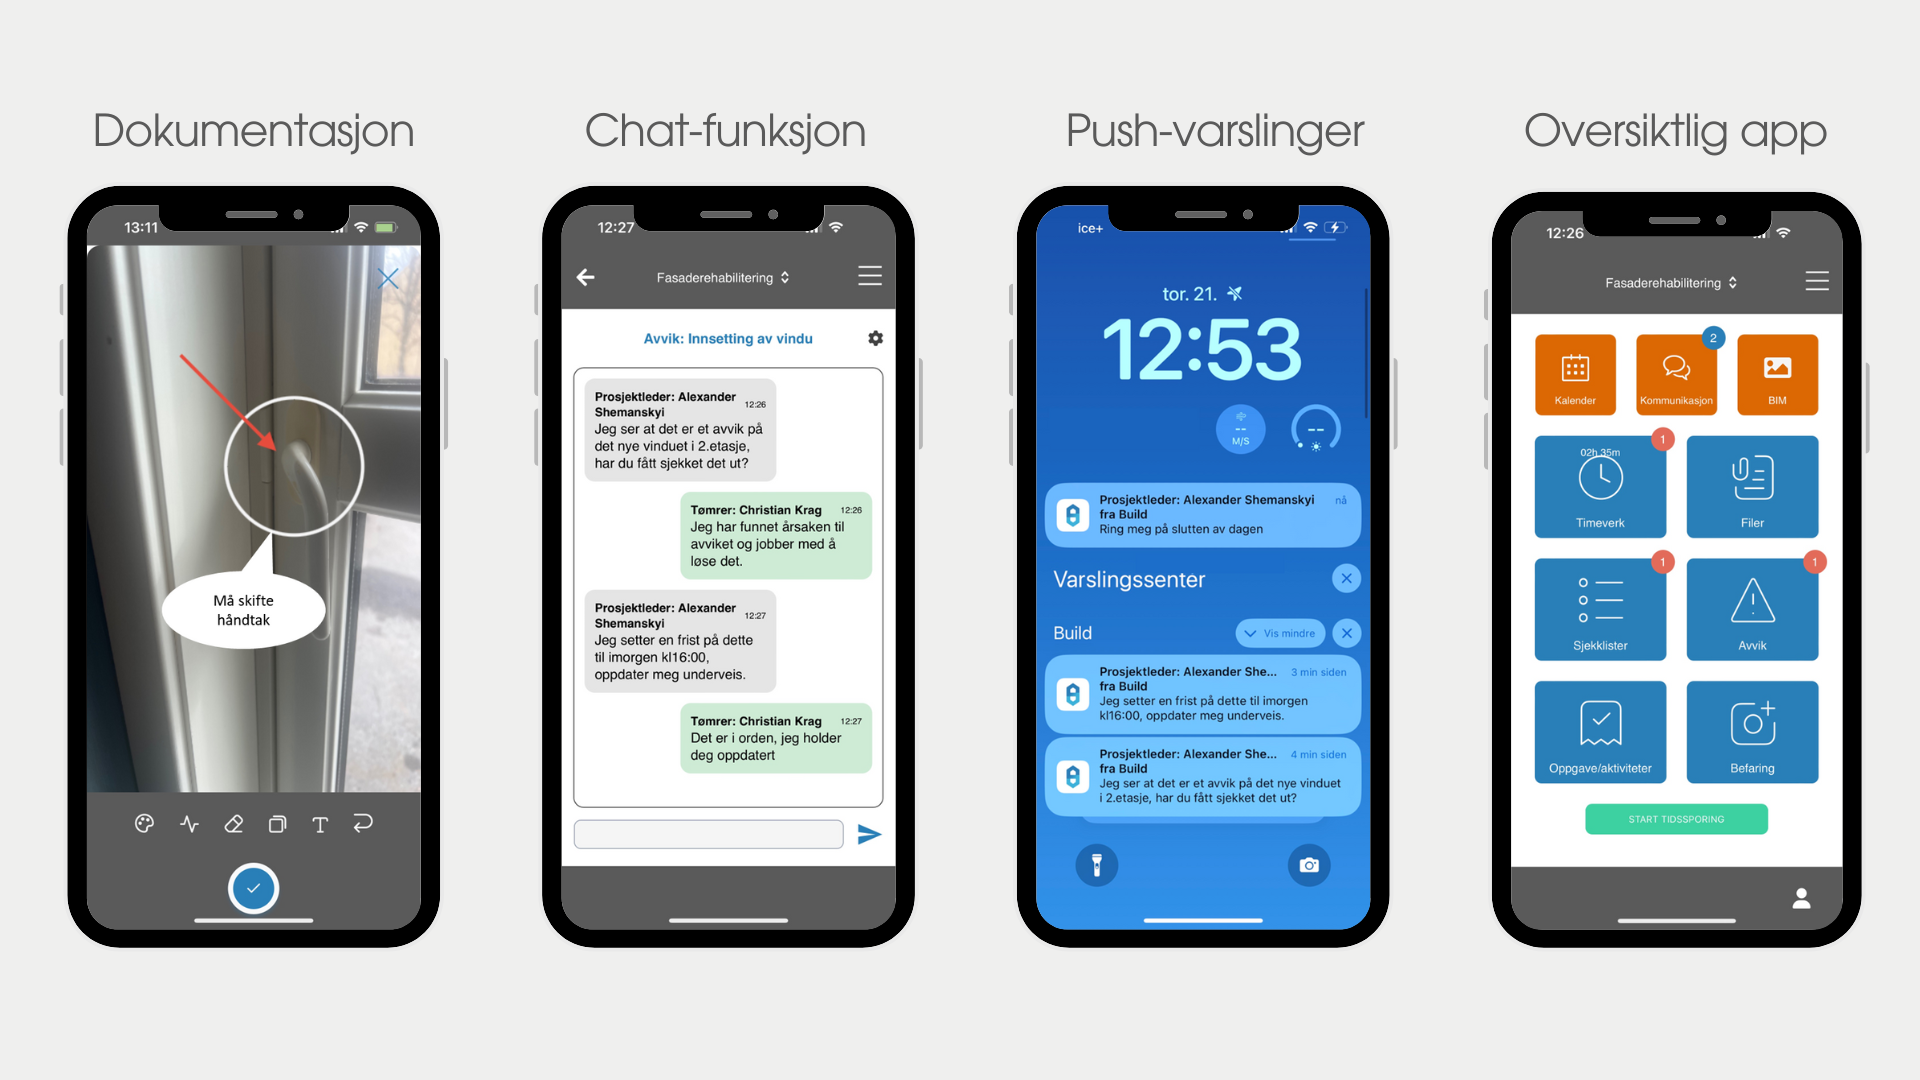 Project management with effective communication: Introducing Chat feature in the mobile app.